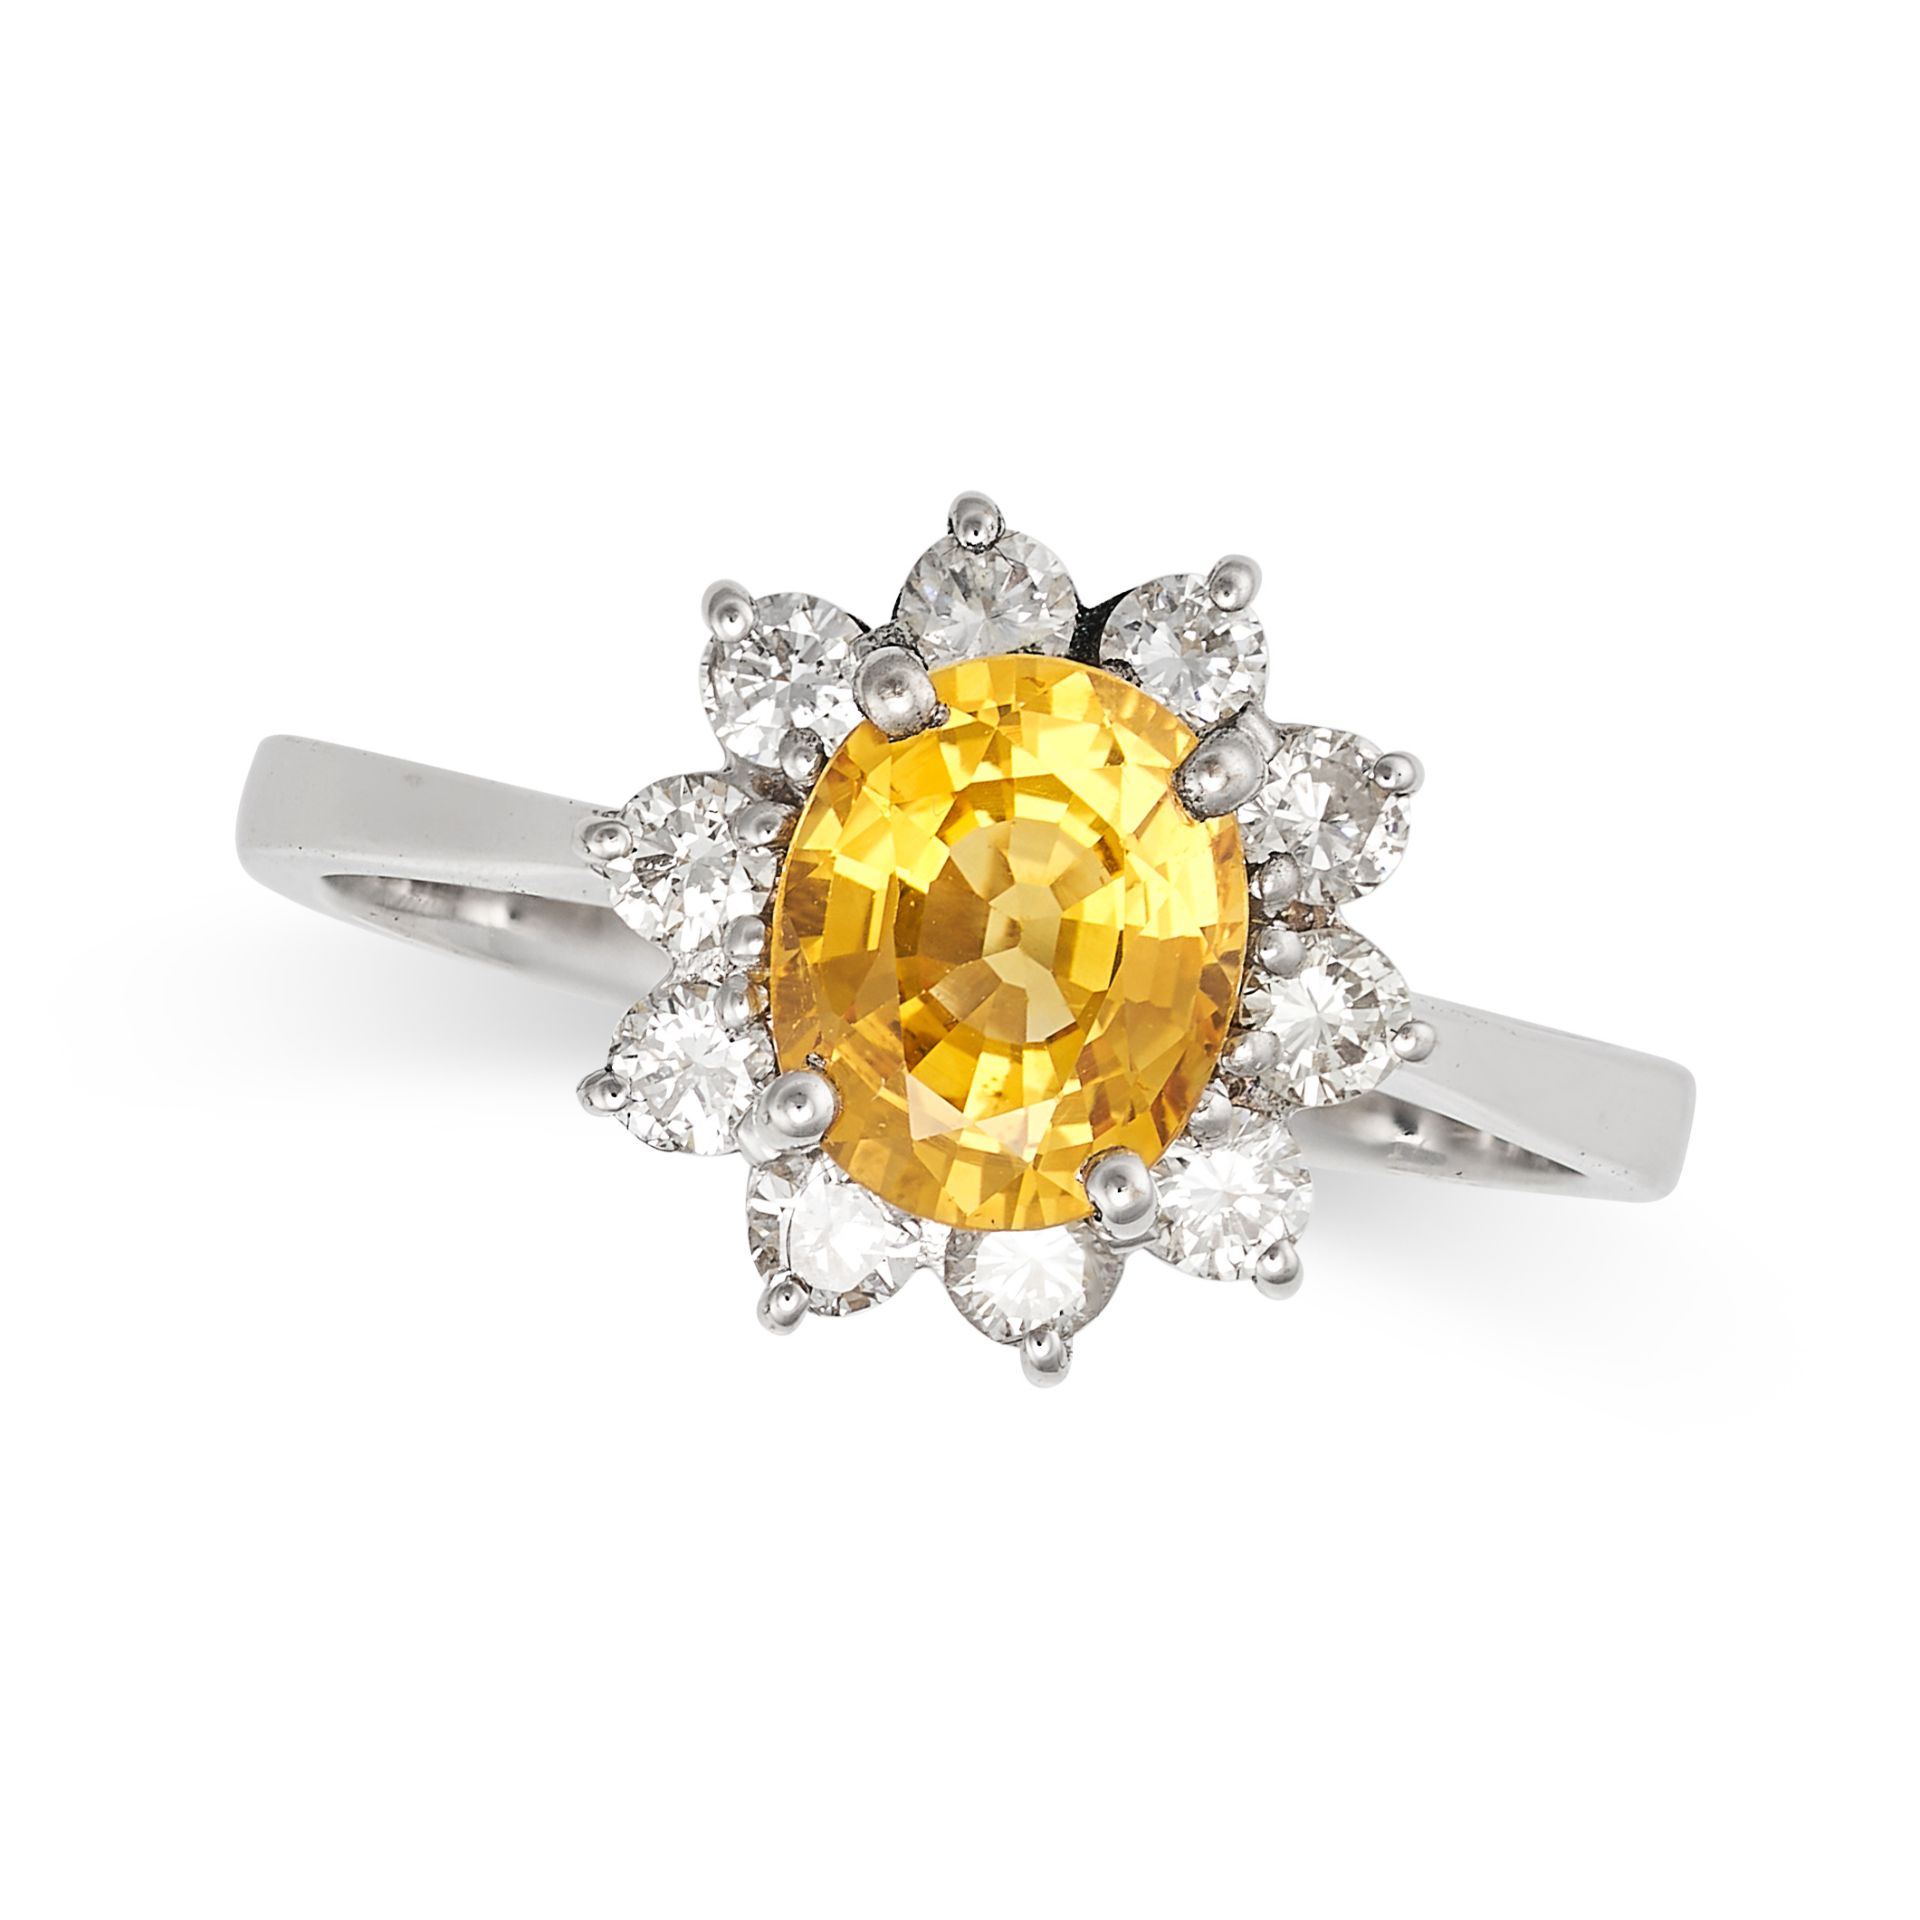 A YELLOW SAPPHIRE AND DIAMOND CLUSTER RING in 18ct white gold, set with an oval cut yellow sapphi...